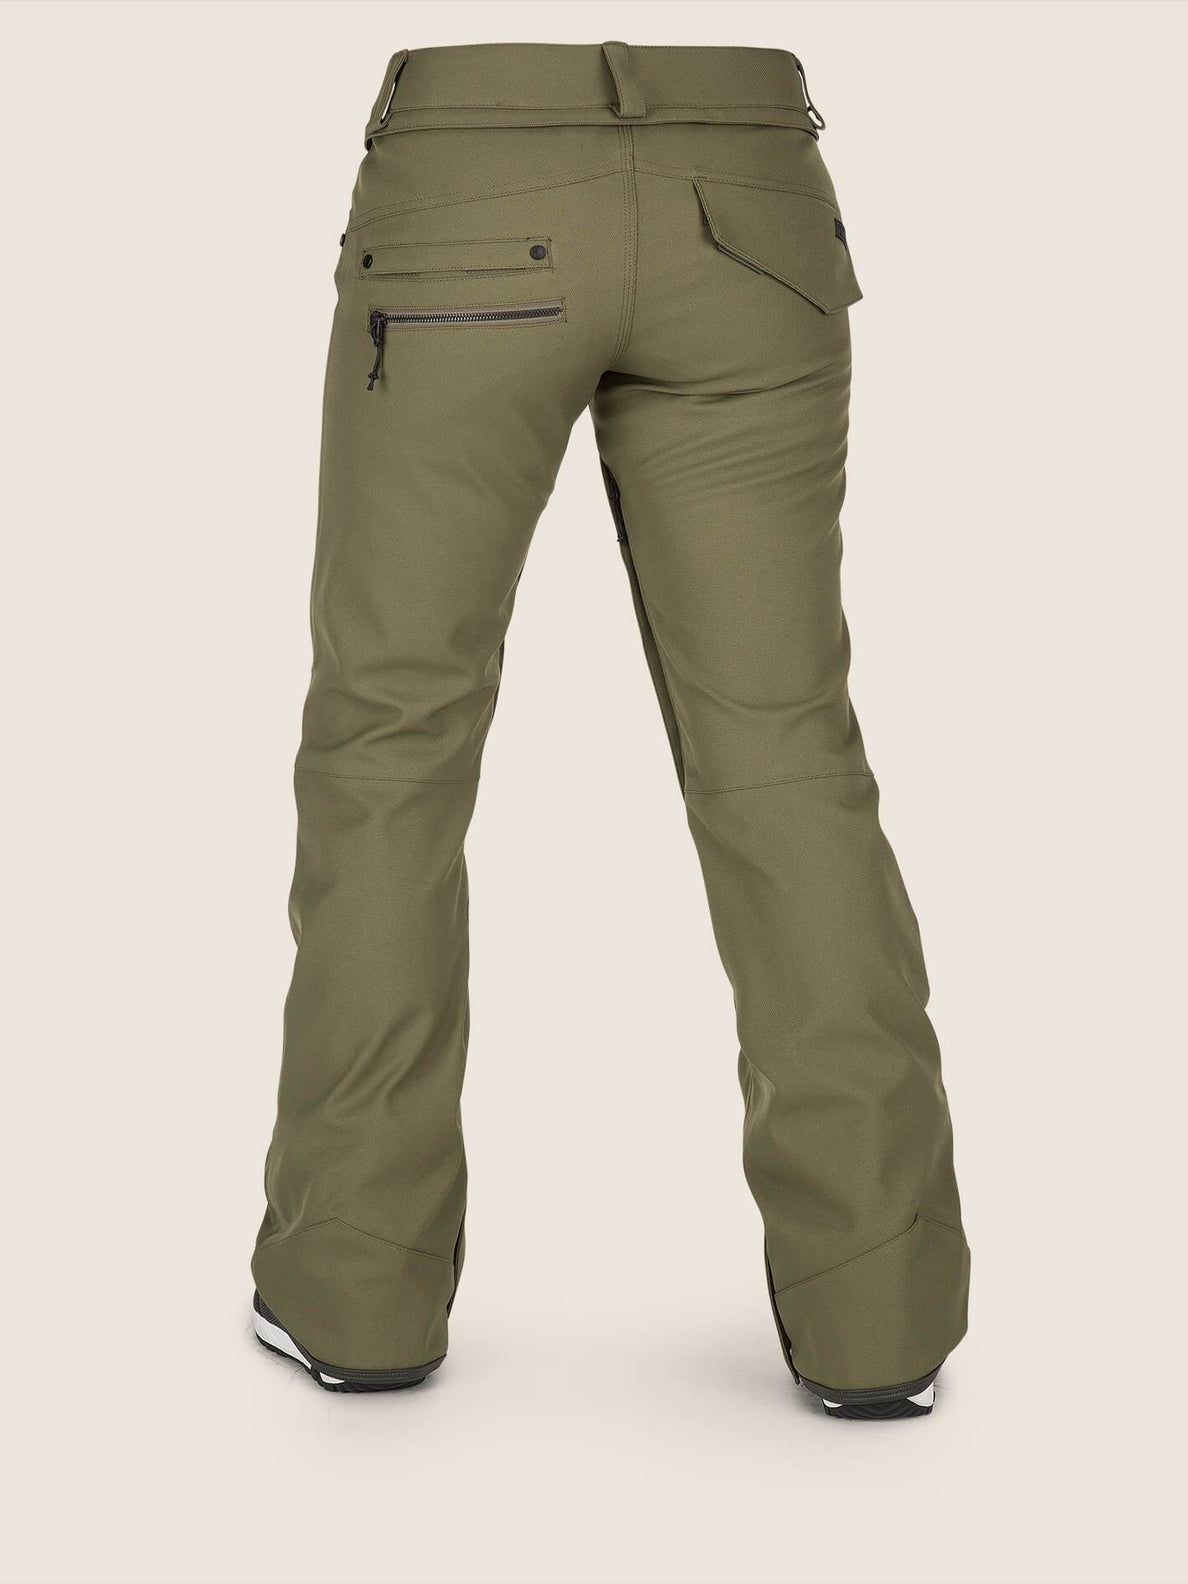 Species Stretch Pants - Military